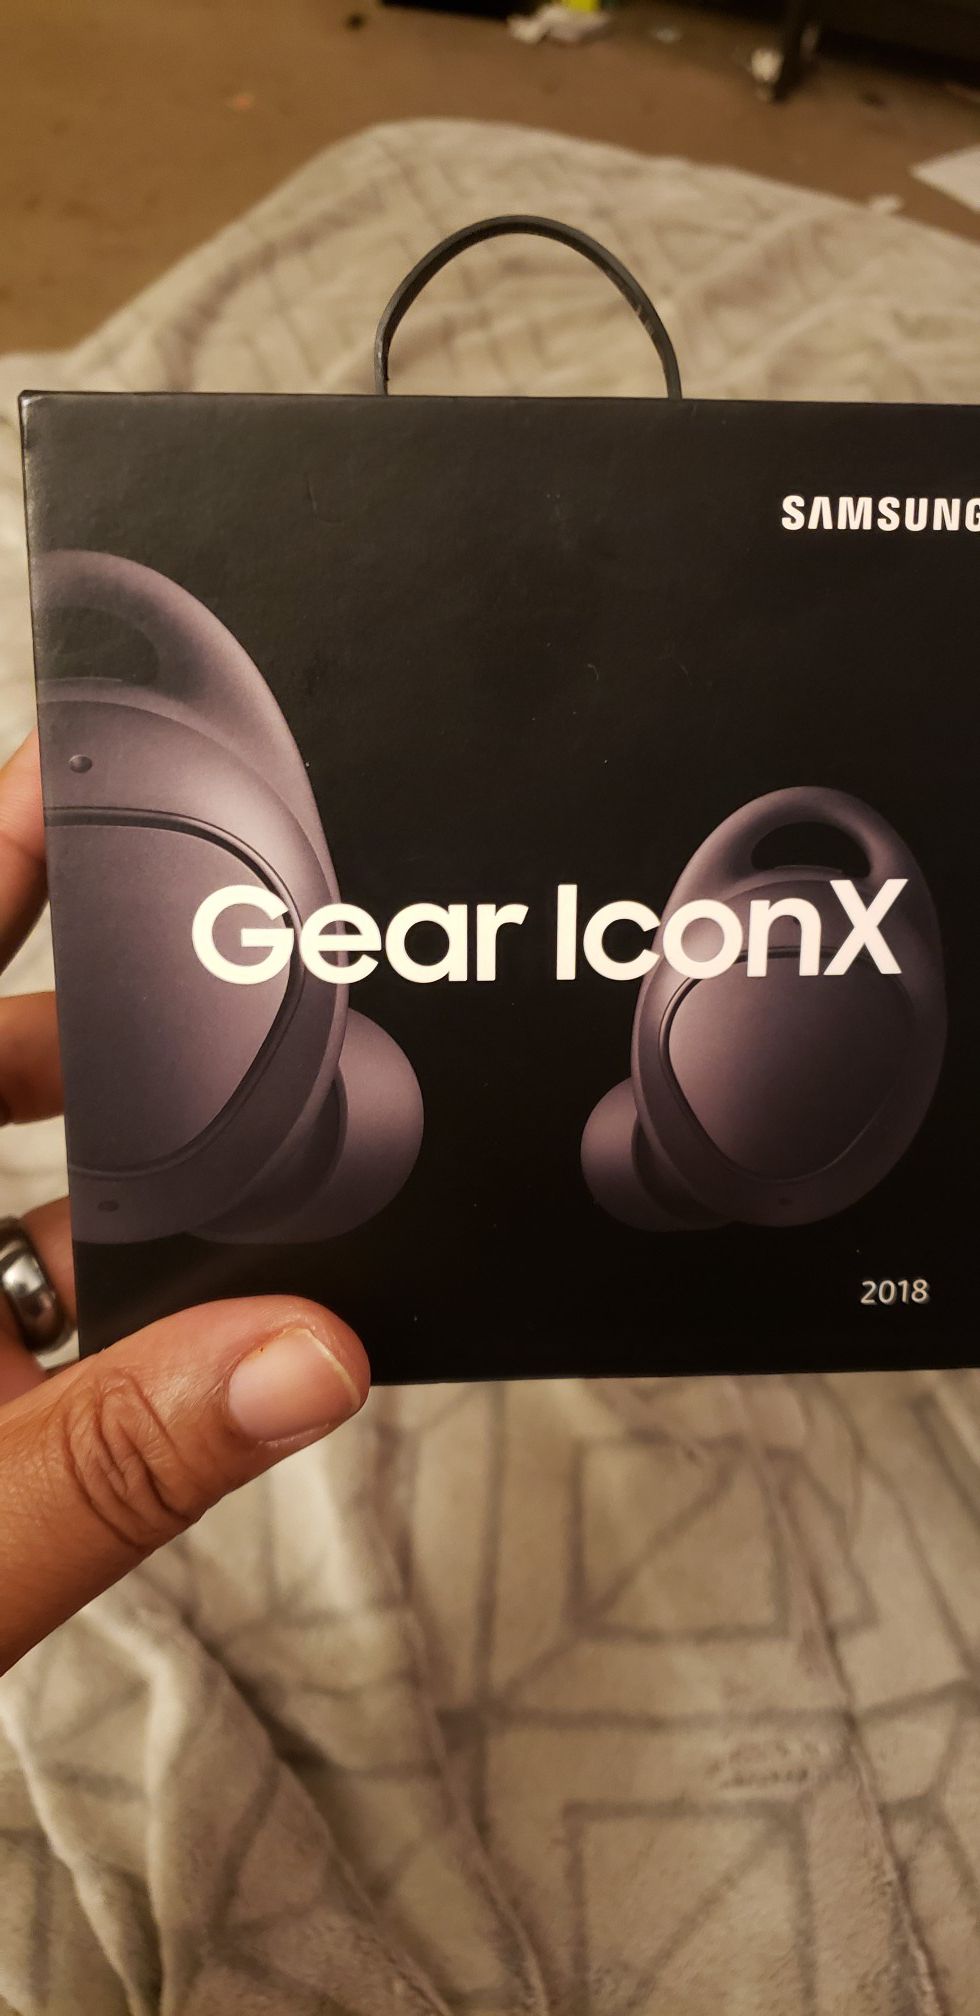 Icon X earbuds